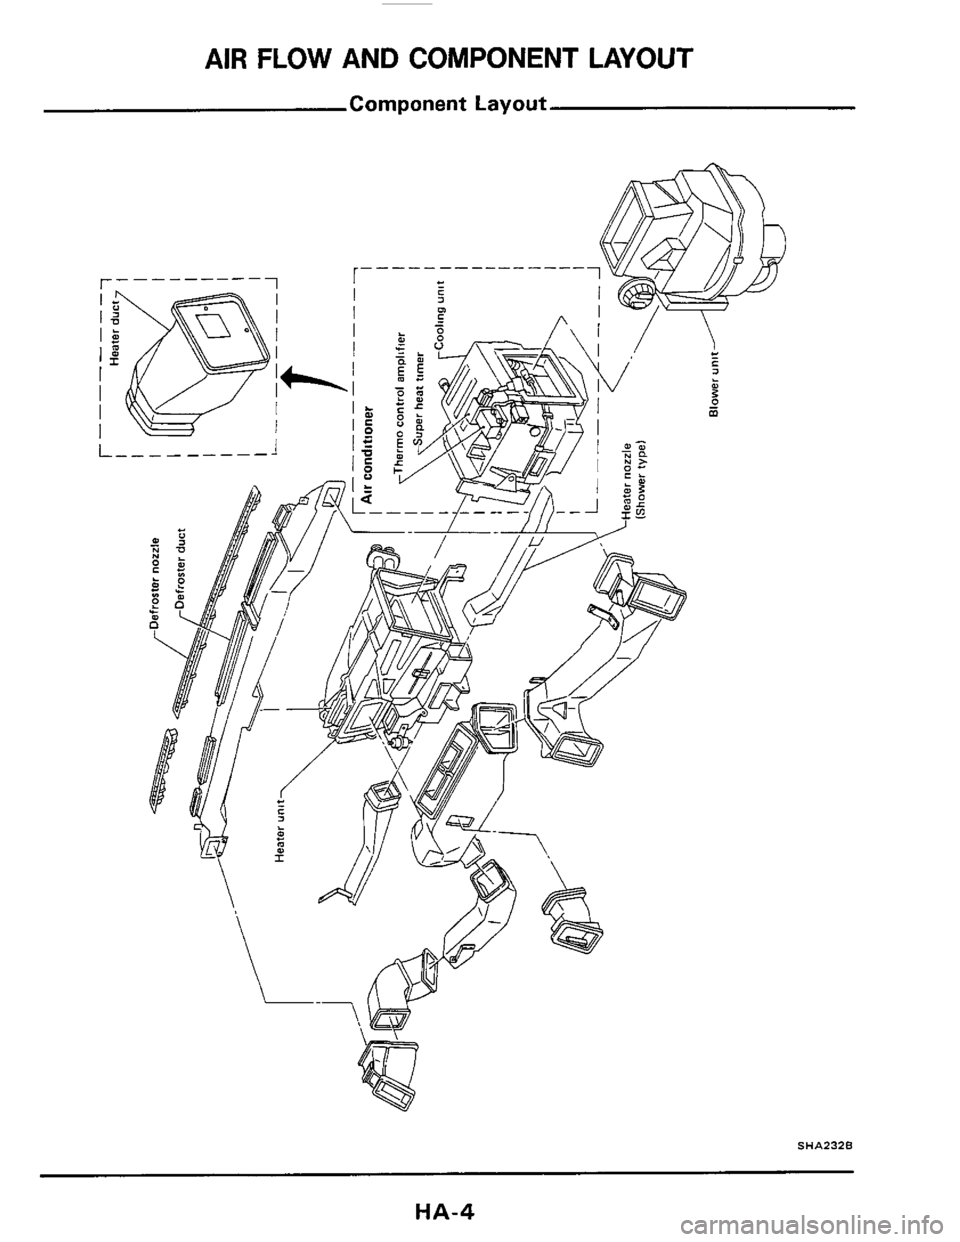 NISSAN 300ZX 1984 Z31 Heather And Air Conditioner Workshop Manual AIR FLOW AND COMPONENT LAYOUT 
Component Layout 
SHA232B 
HA-4  